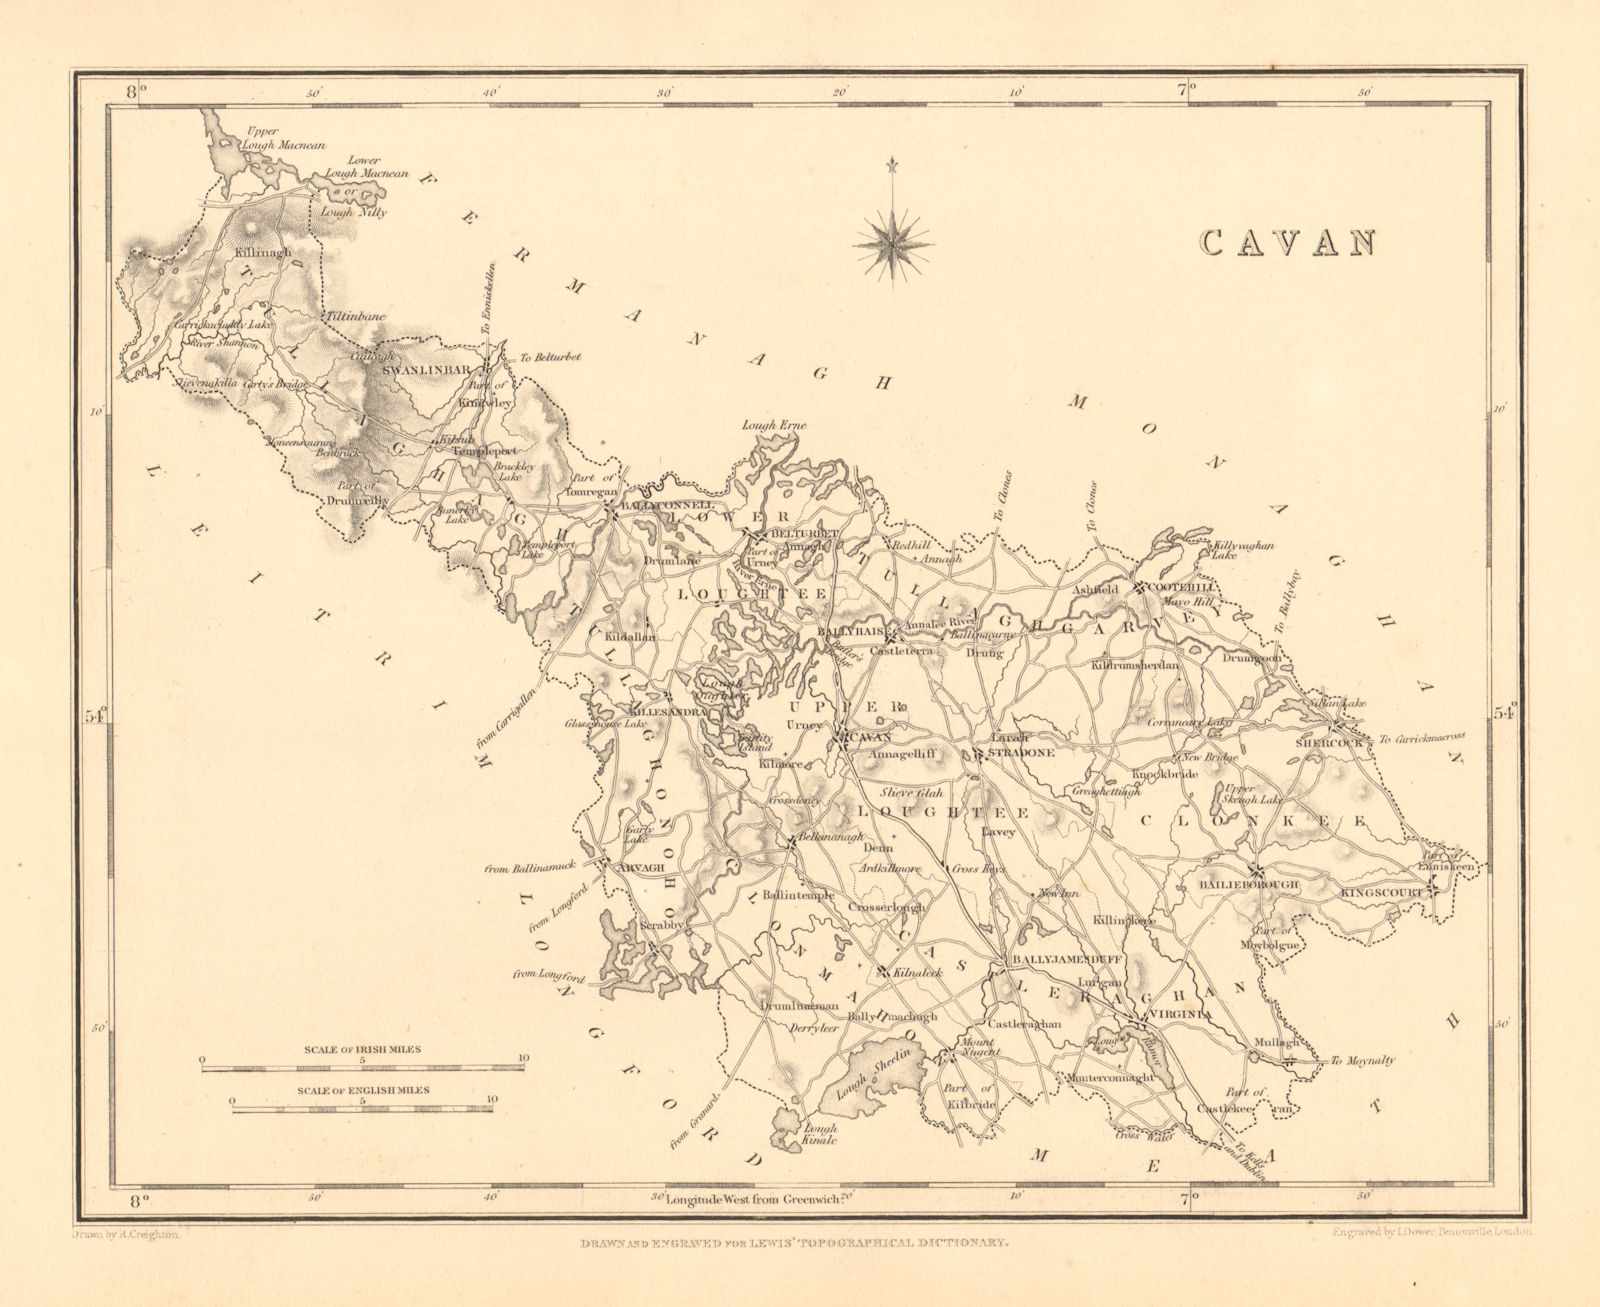 COUNTY CAVAN antique map for LEWIS by CREIGHTON & DOWER - Ireland 1846 old